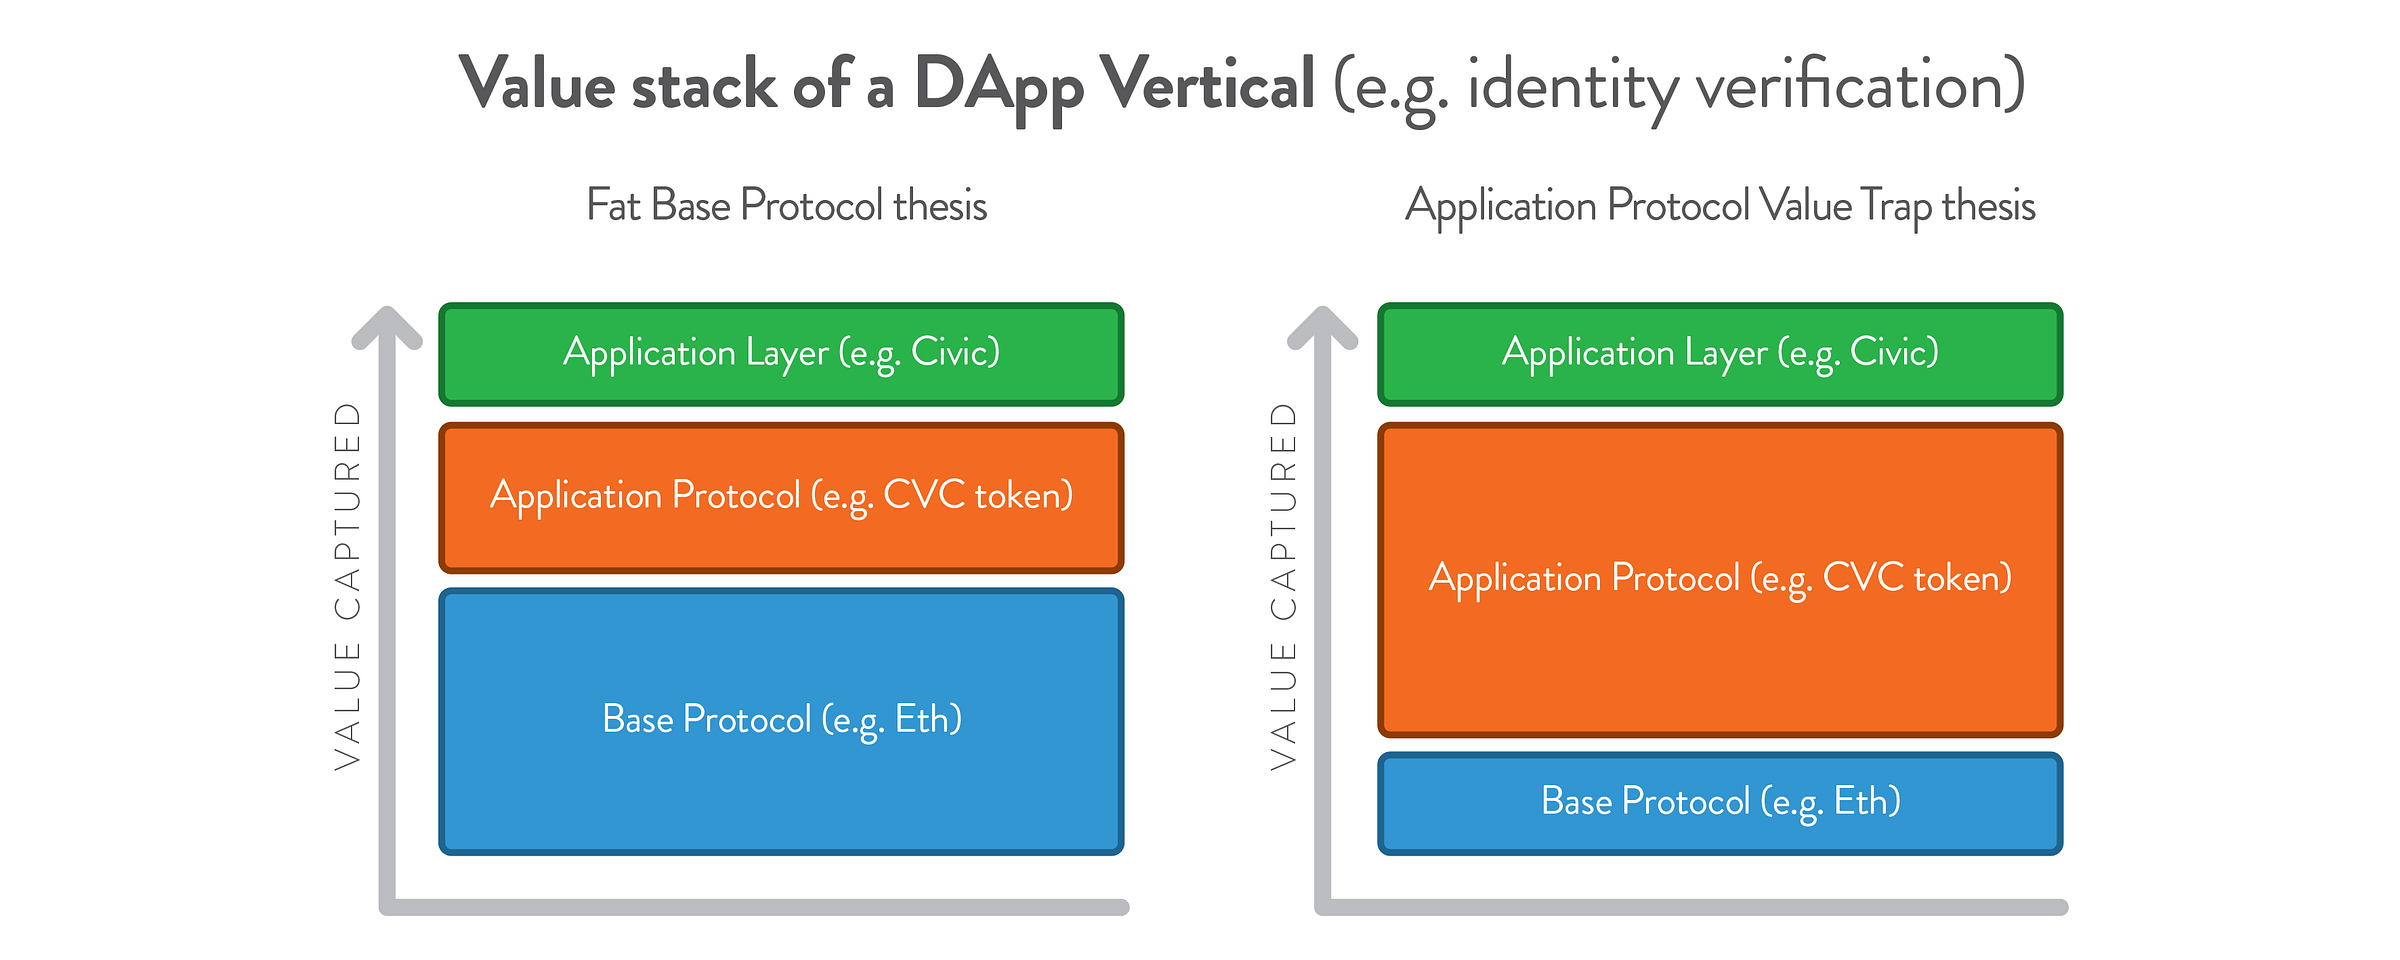 one single application layer